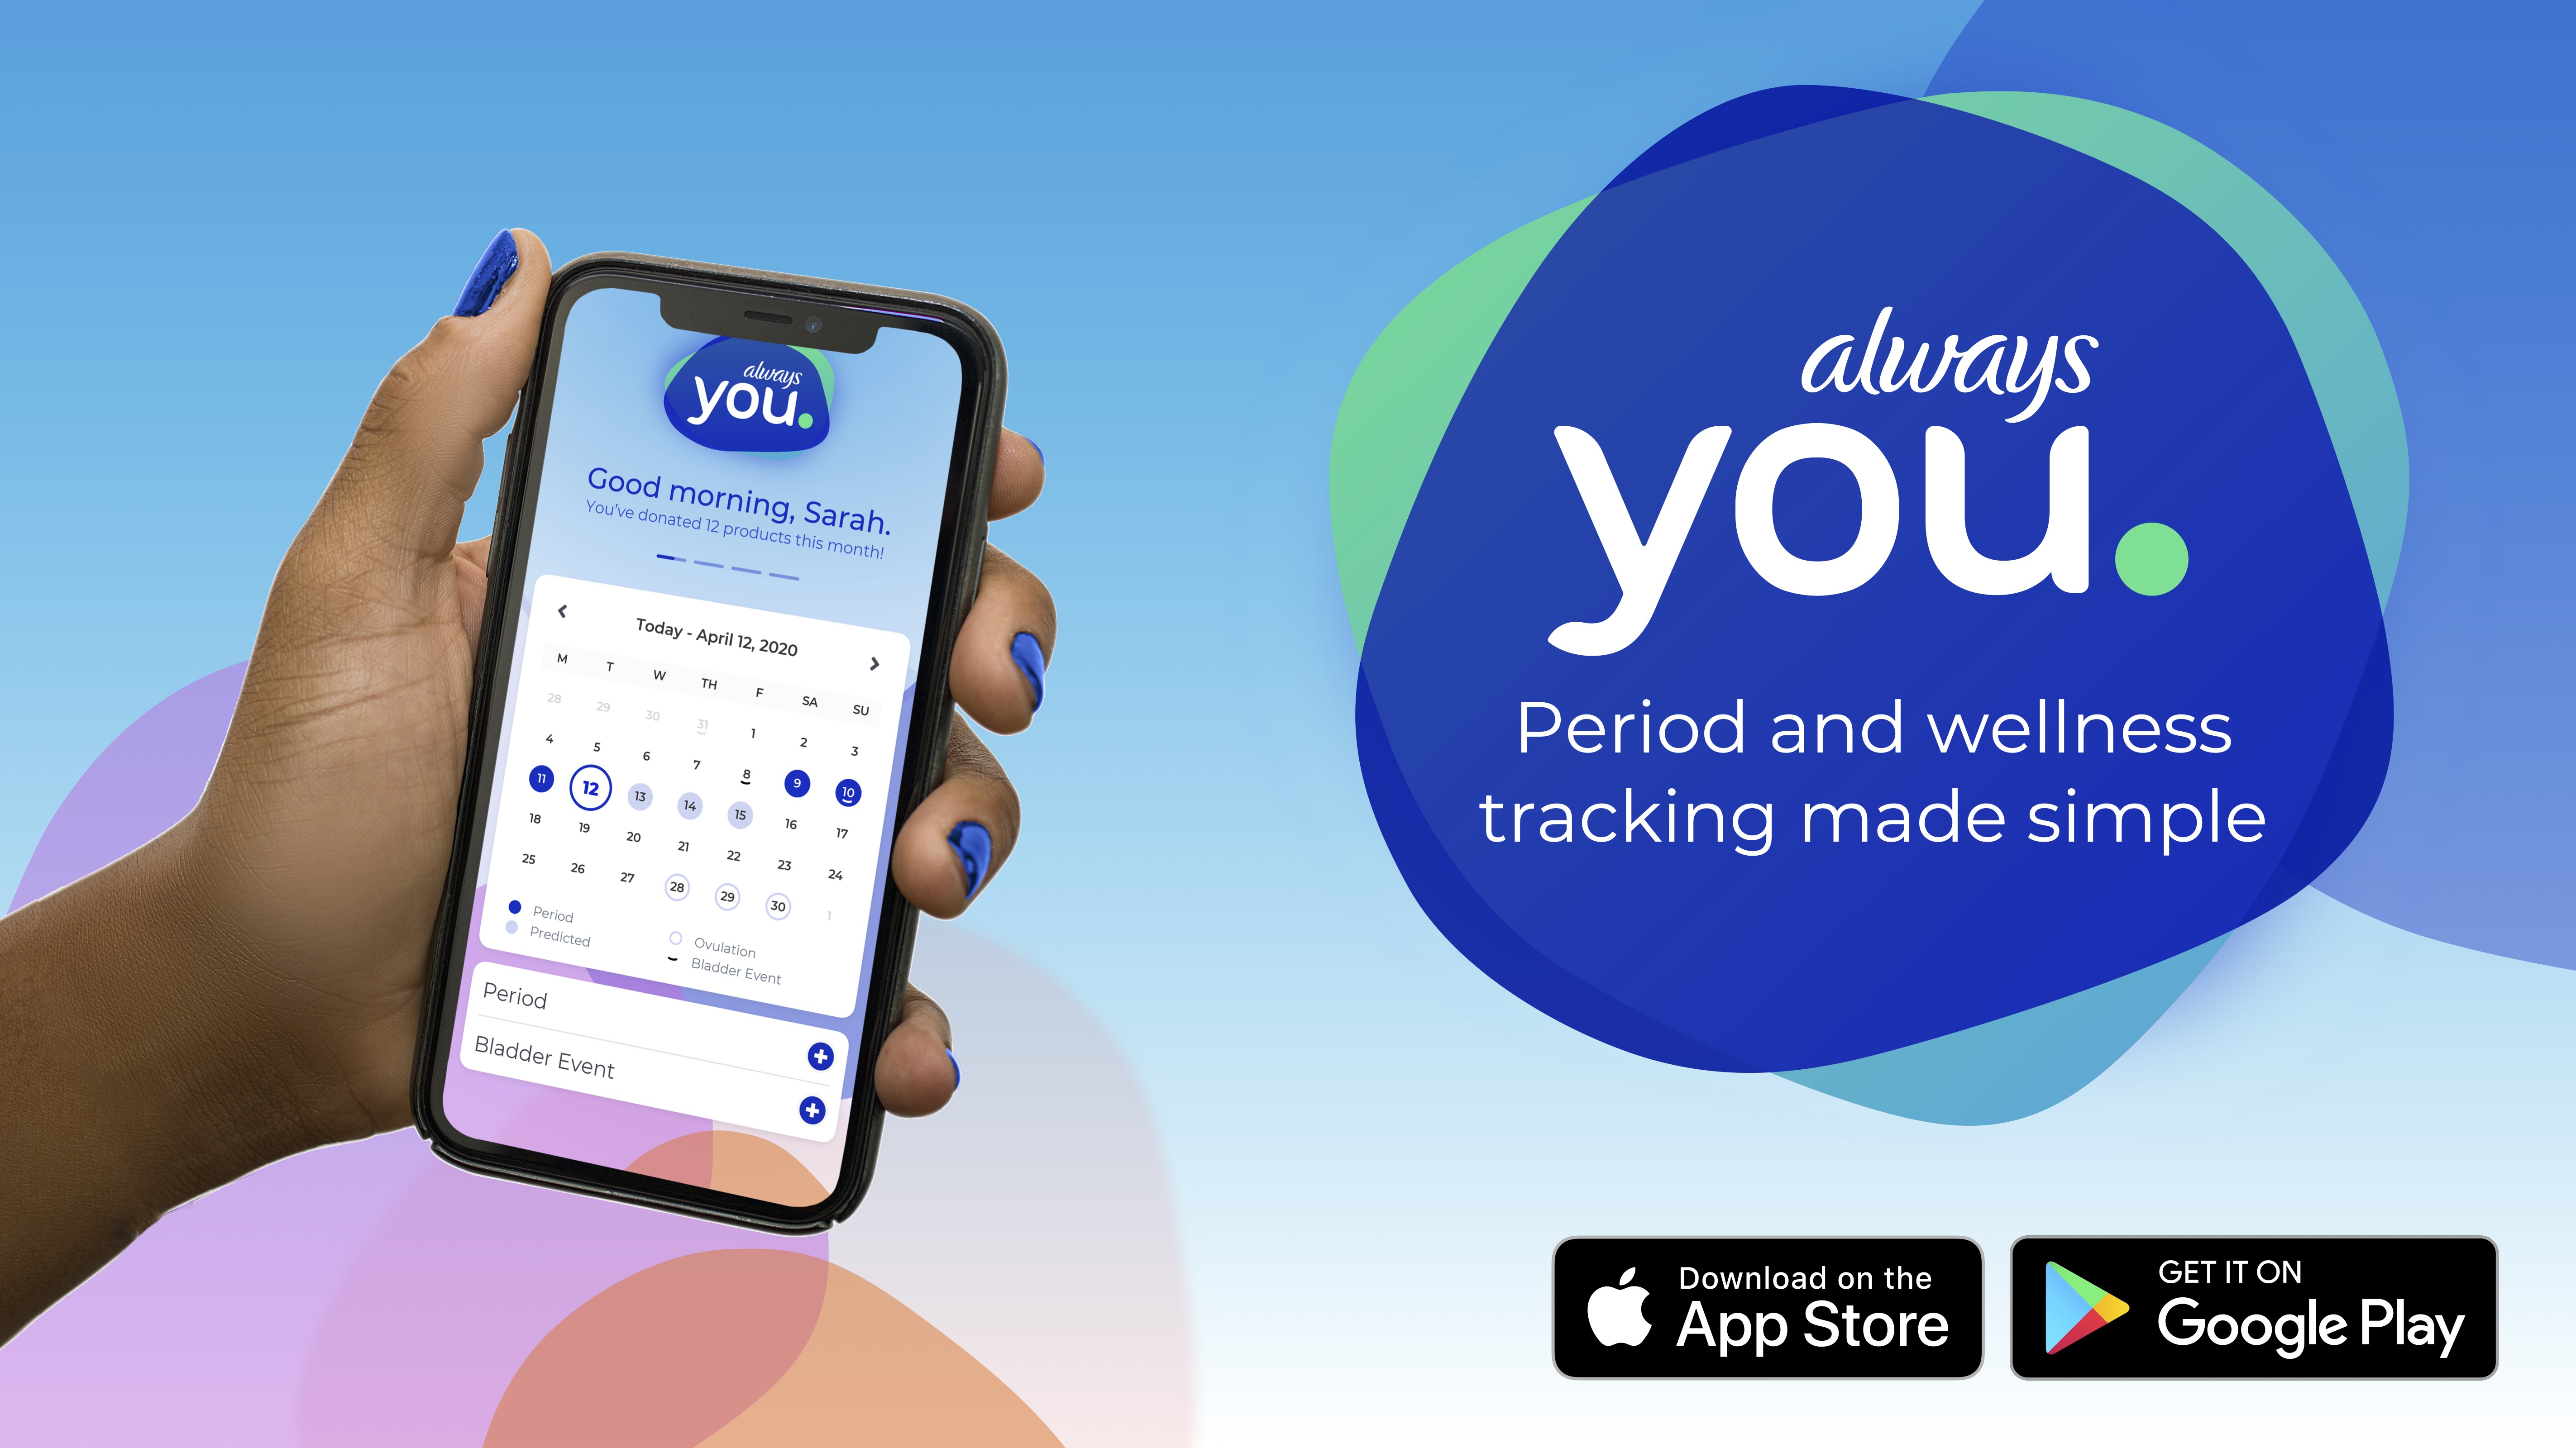 Introducing Always You, the Period Tracker and Wellness App That Helps #EndPeriodPoverty